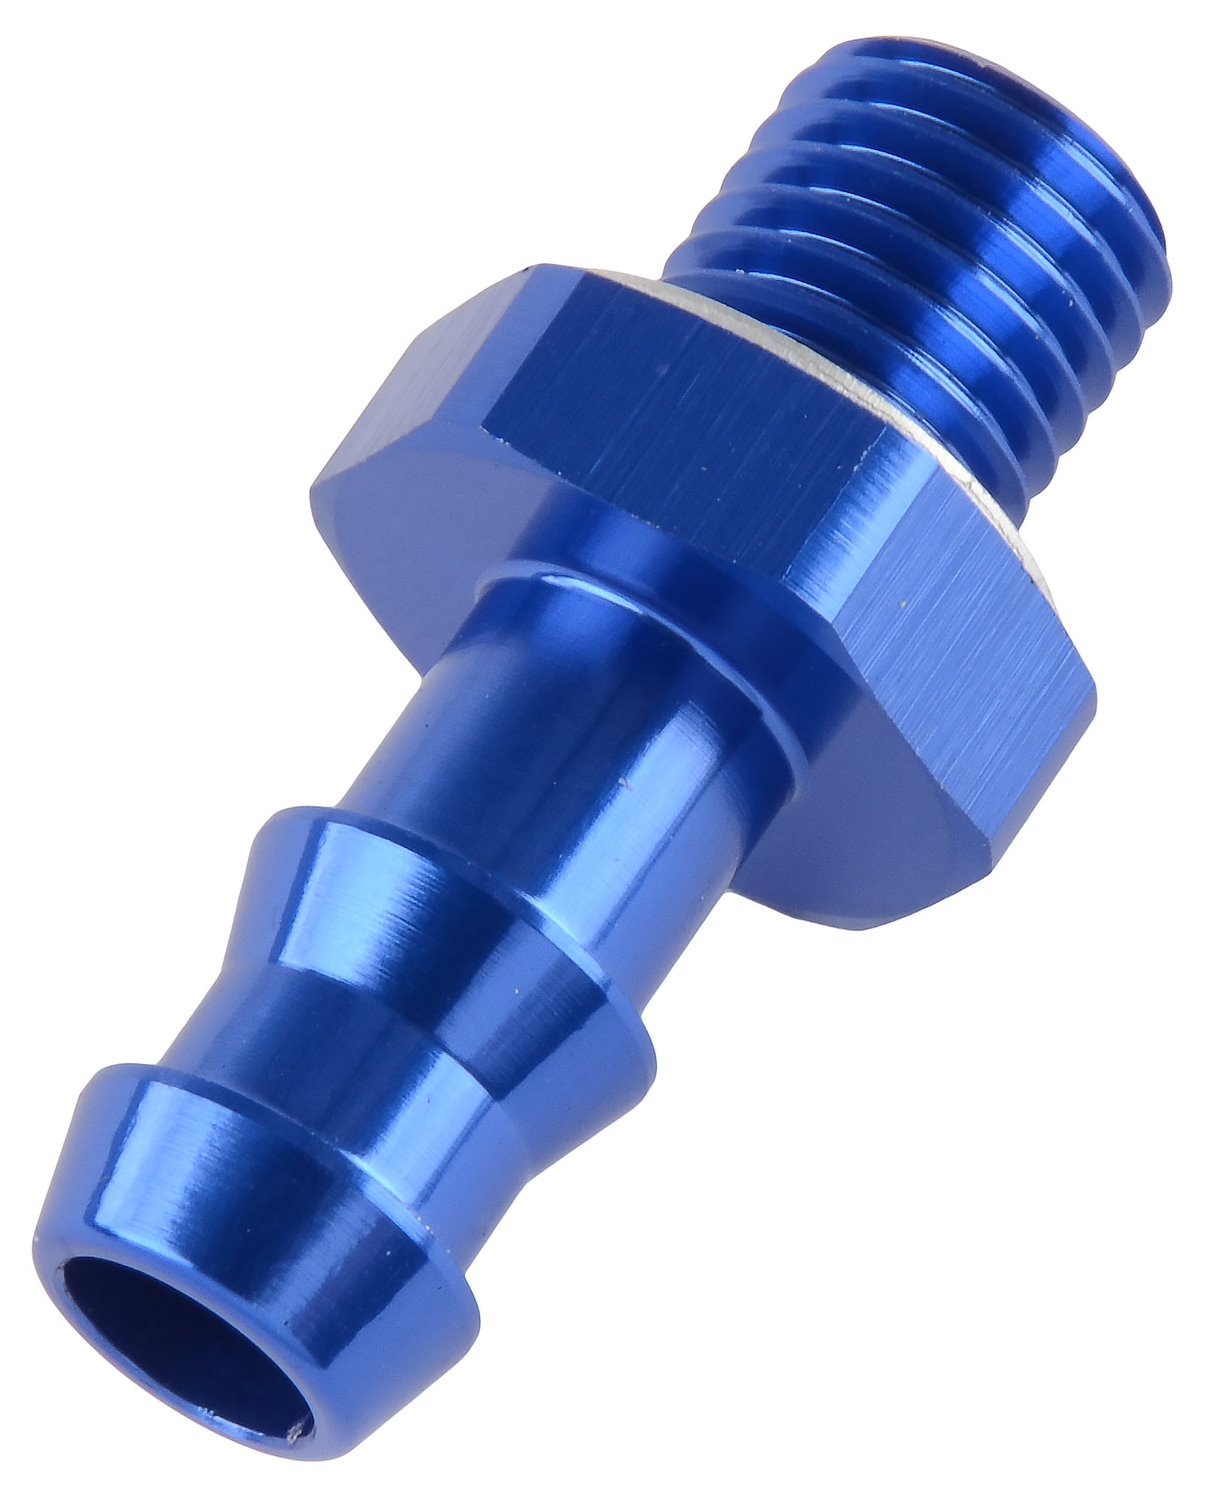 Hose Barb Adapter 12mm x 1.5 Male Straight to 3/8" Hose